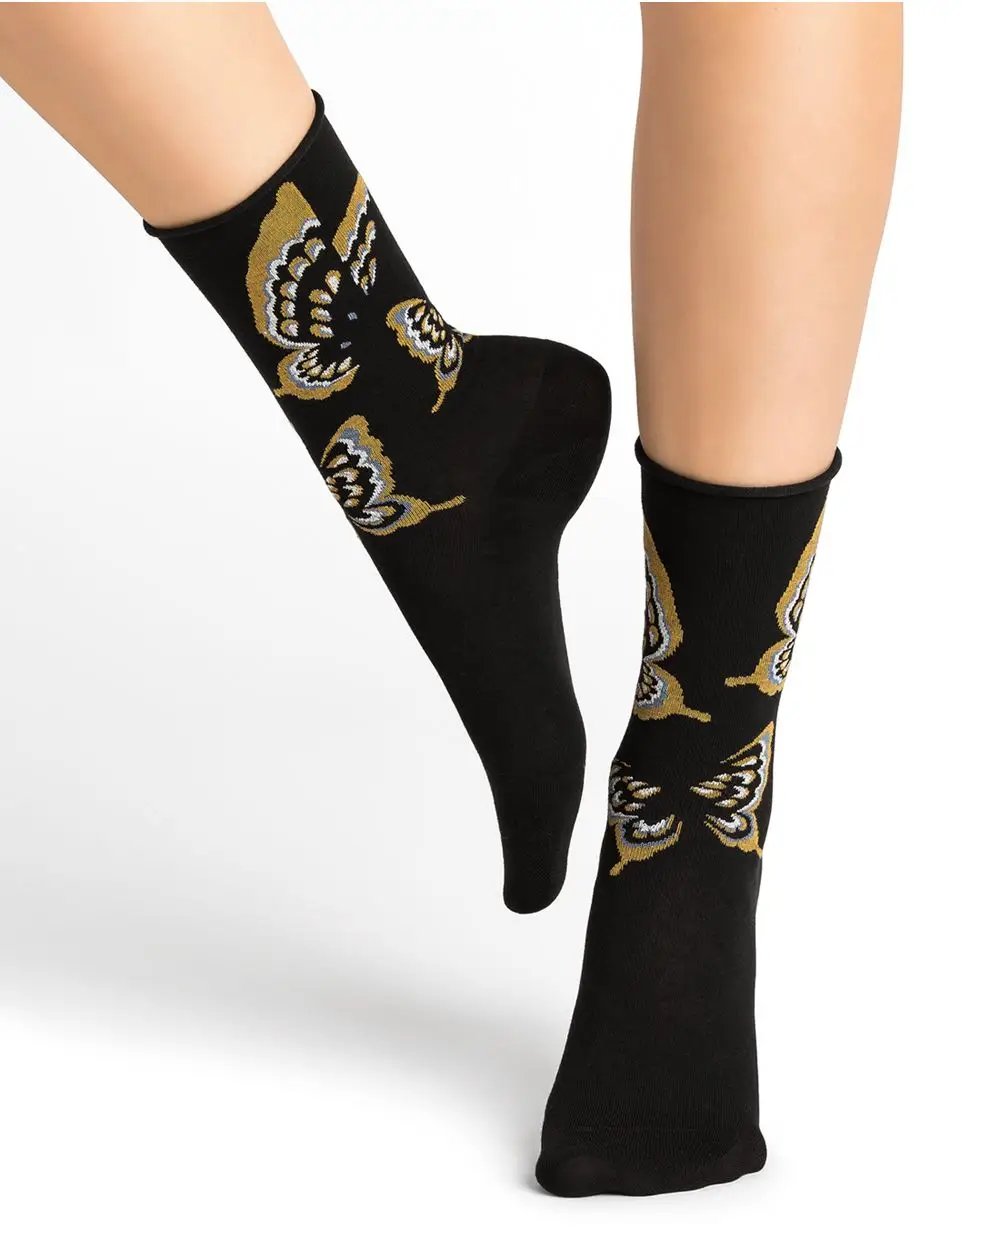 A woman's legs adorned with soft and comfortable Bleuforet 6435 Velvety Butterfly Socks Black featuring birds.